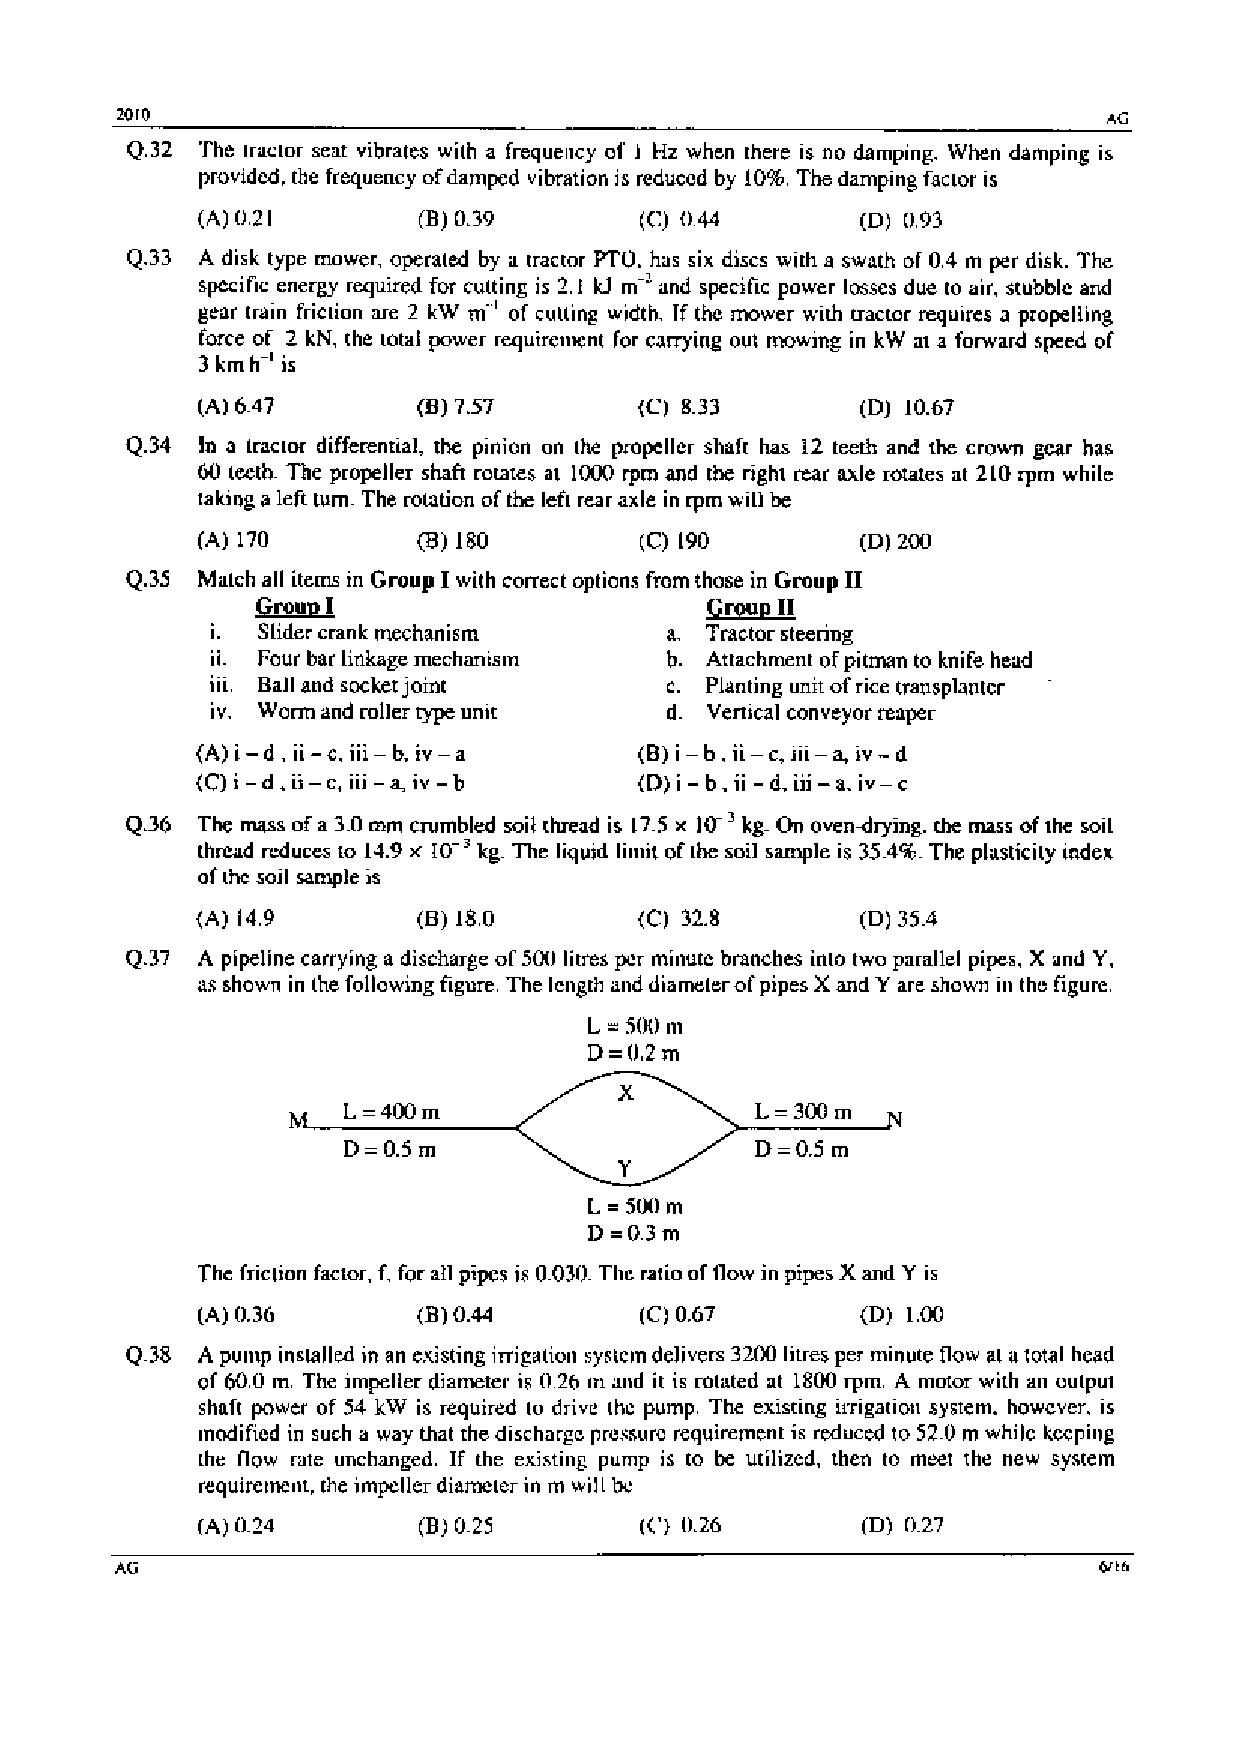 GATE Exam Question Paper 2010 Agricultural Engineering 6